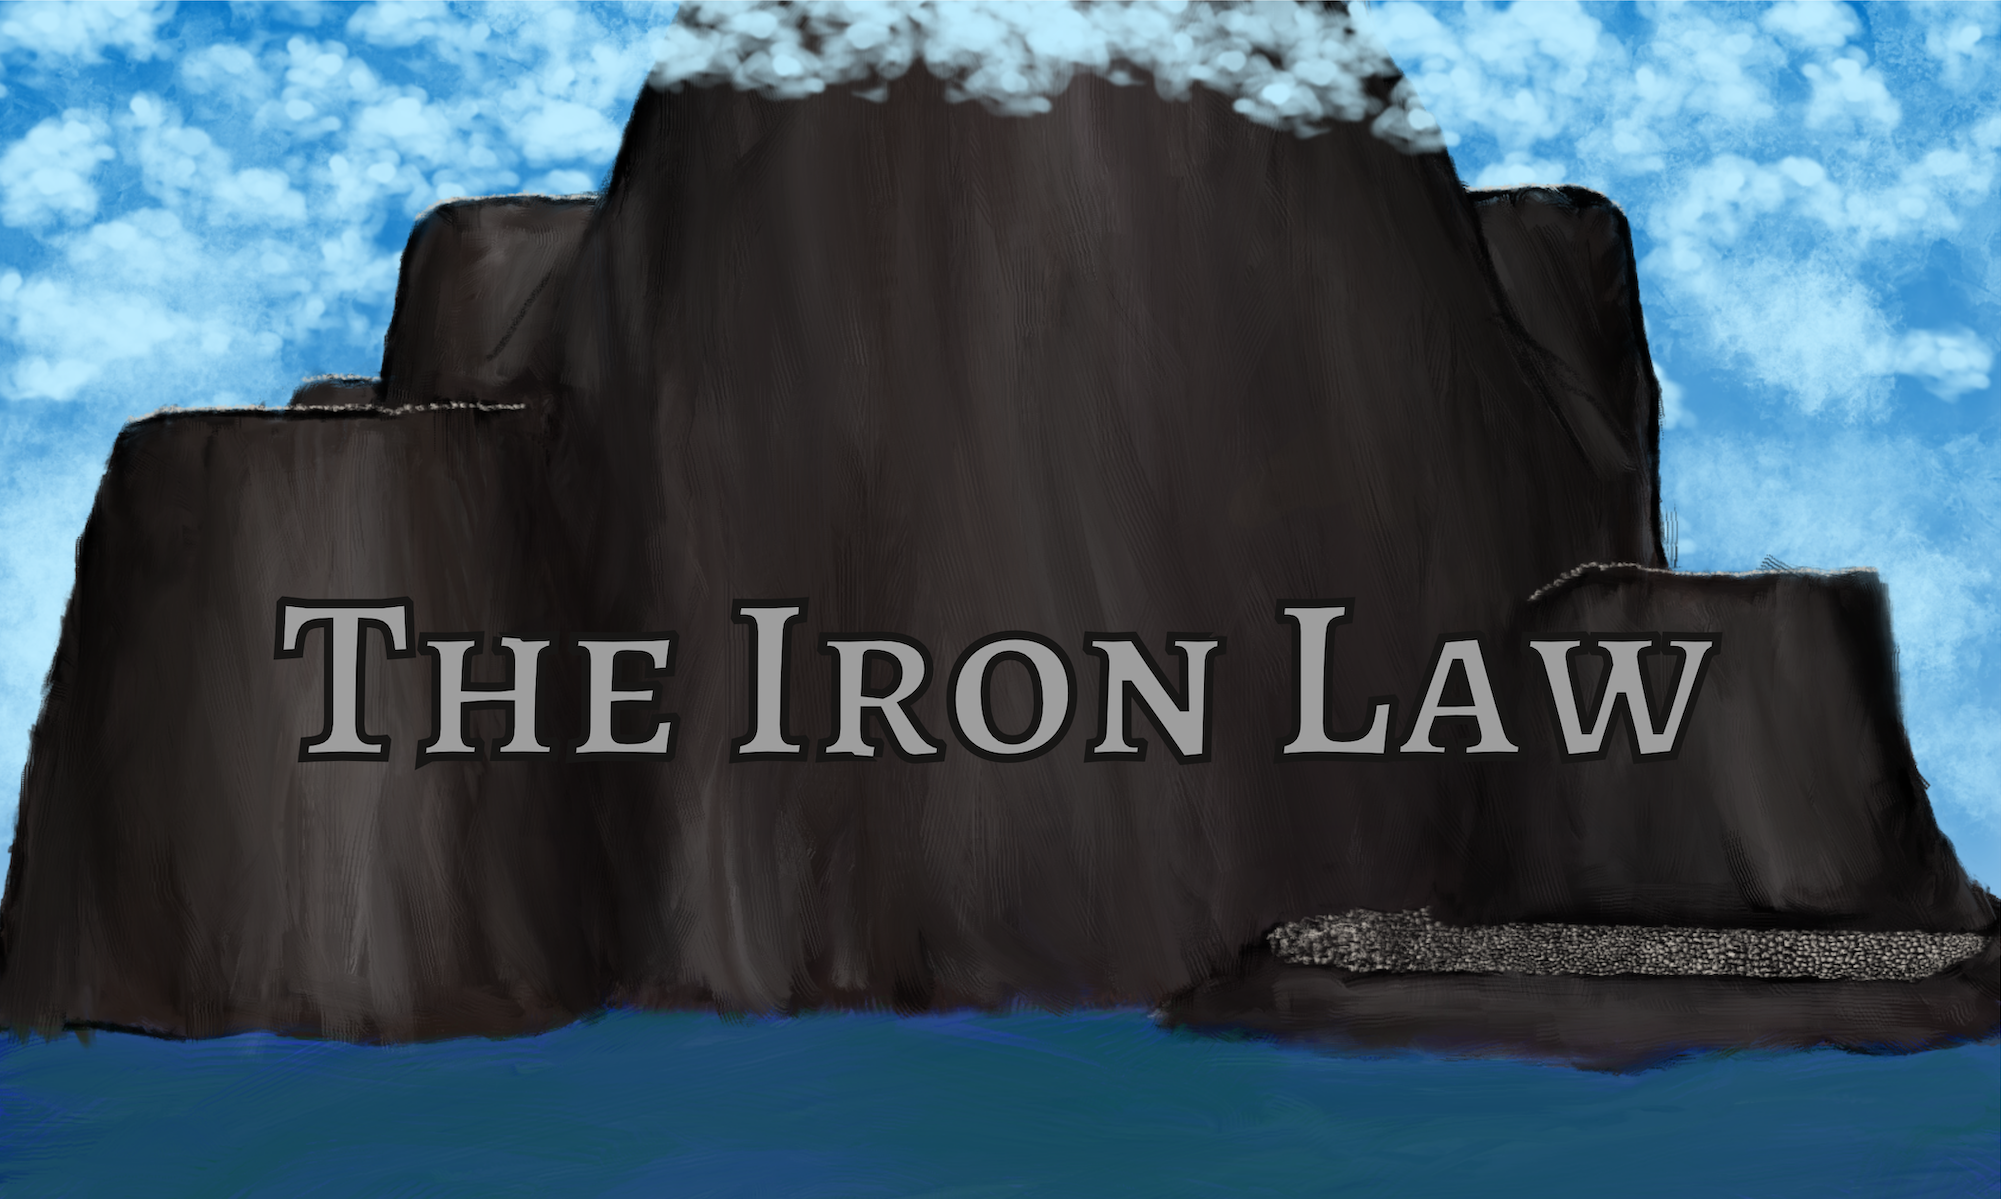 The Iron Law